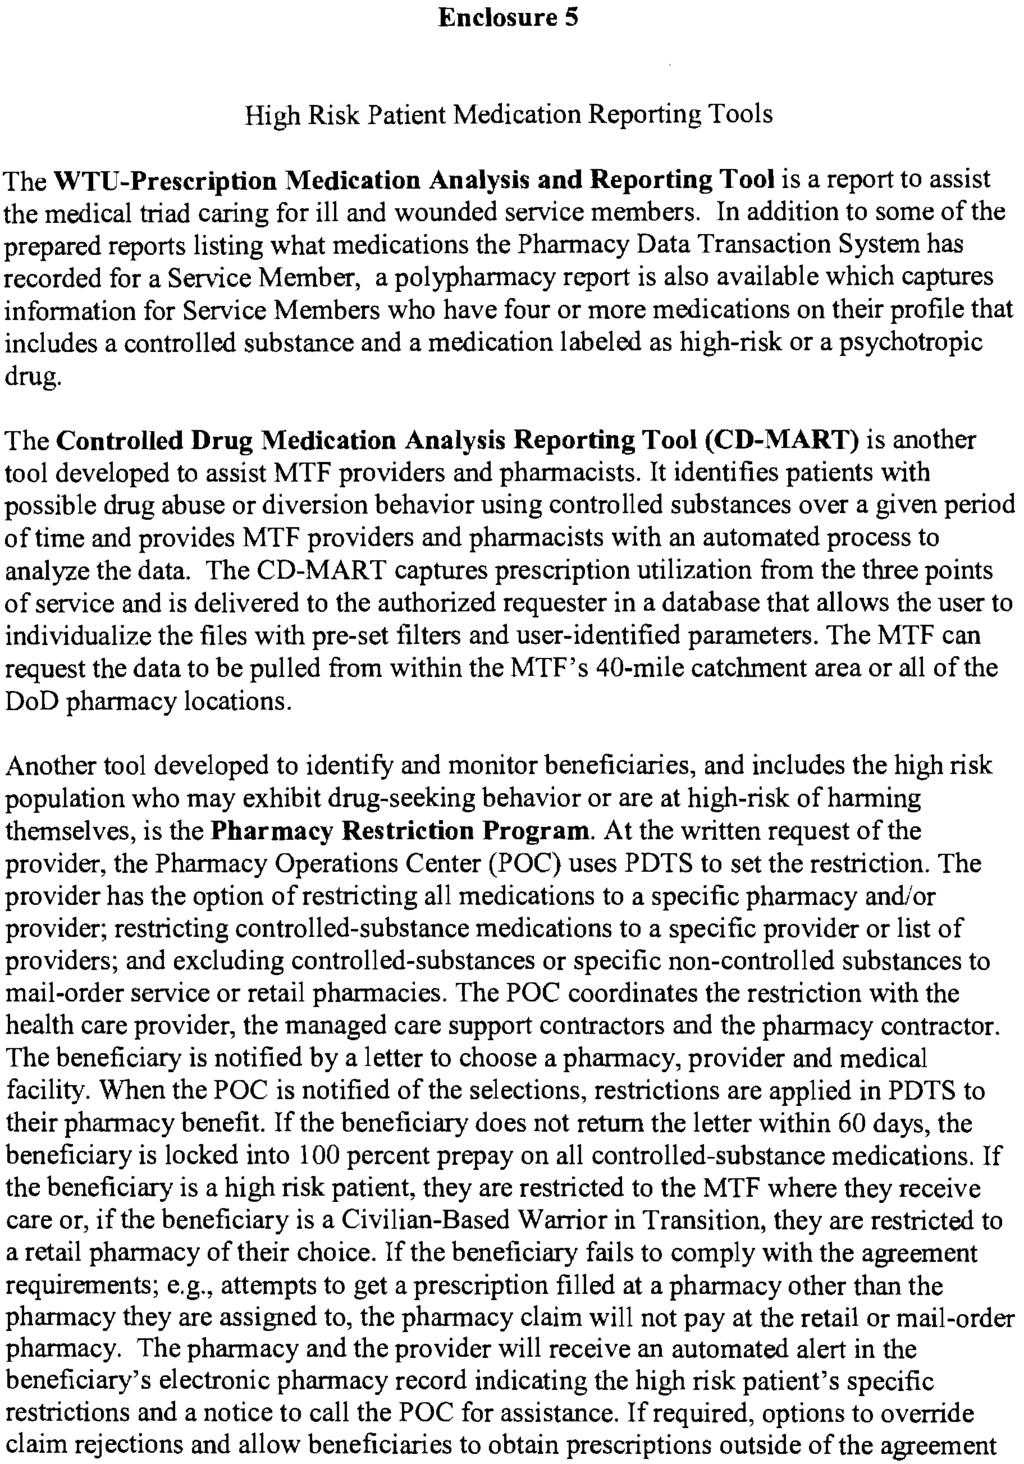 Enclosure 5 High Risk Patient Medication Reporting Tools The WTU-Prescription Medication Analysis and Reporting Tool is a report to assist the medical triad caring for ill and wounded service members.